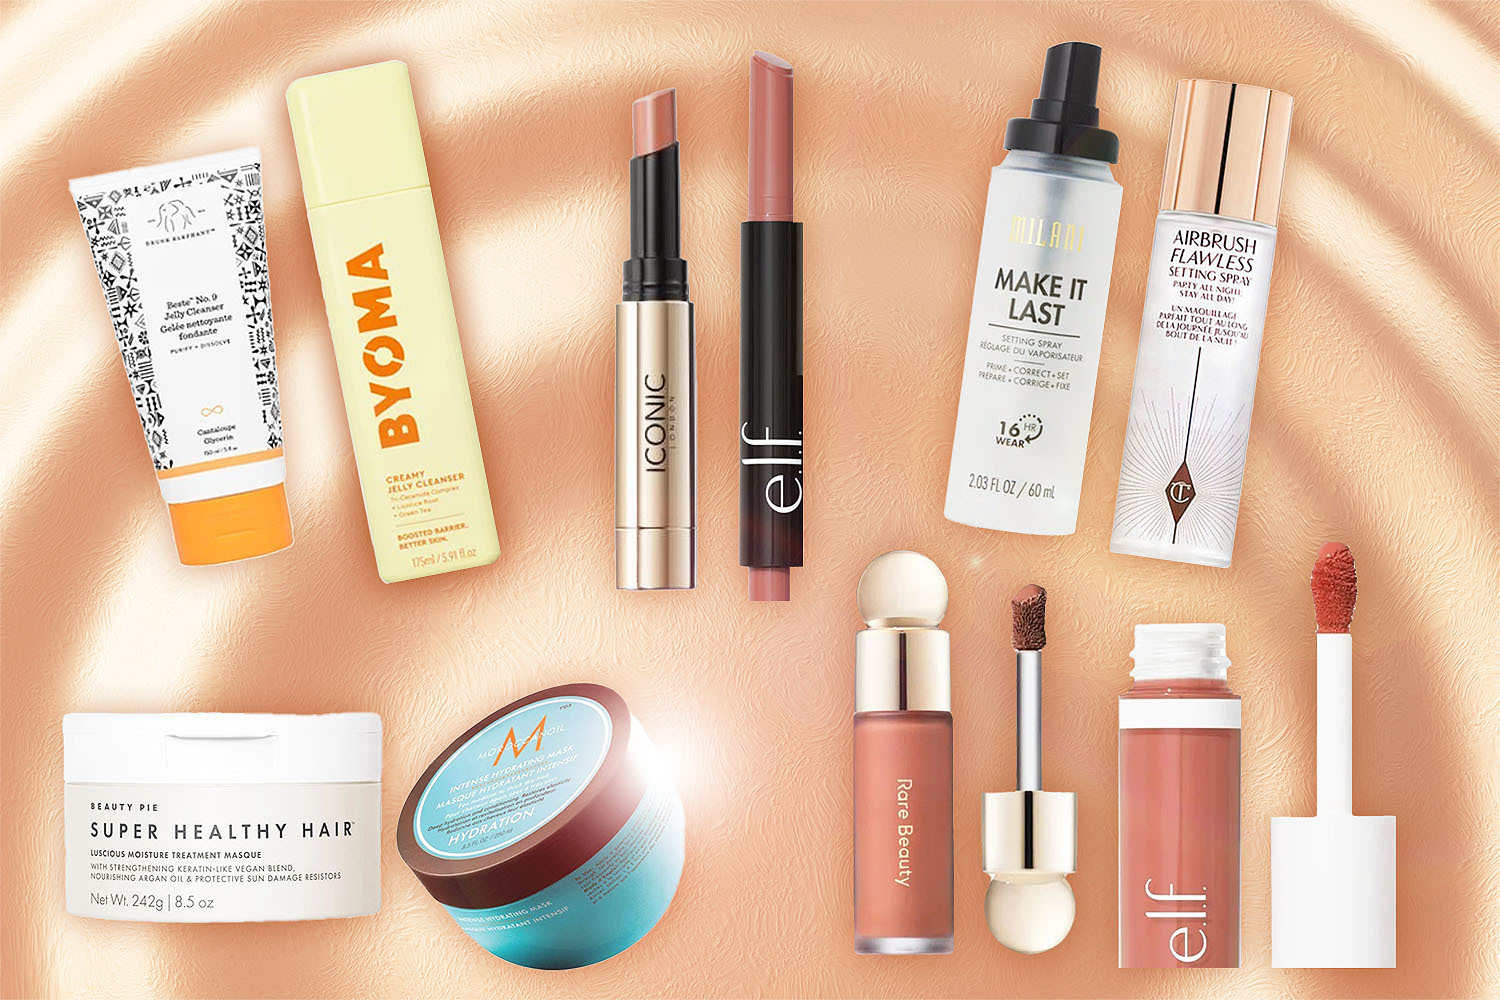 Best Beauty Dupes: The ones worth your cash and the ones to leave on the shelf